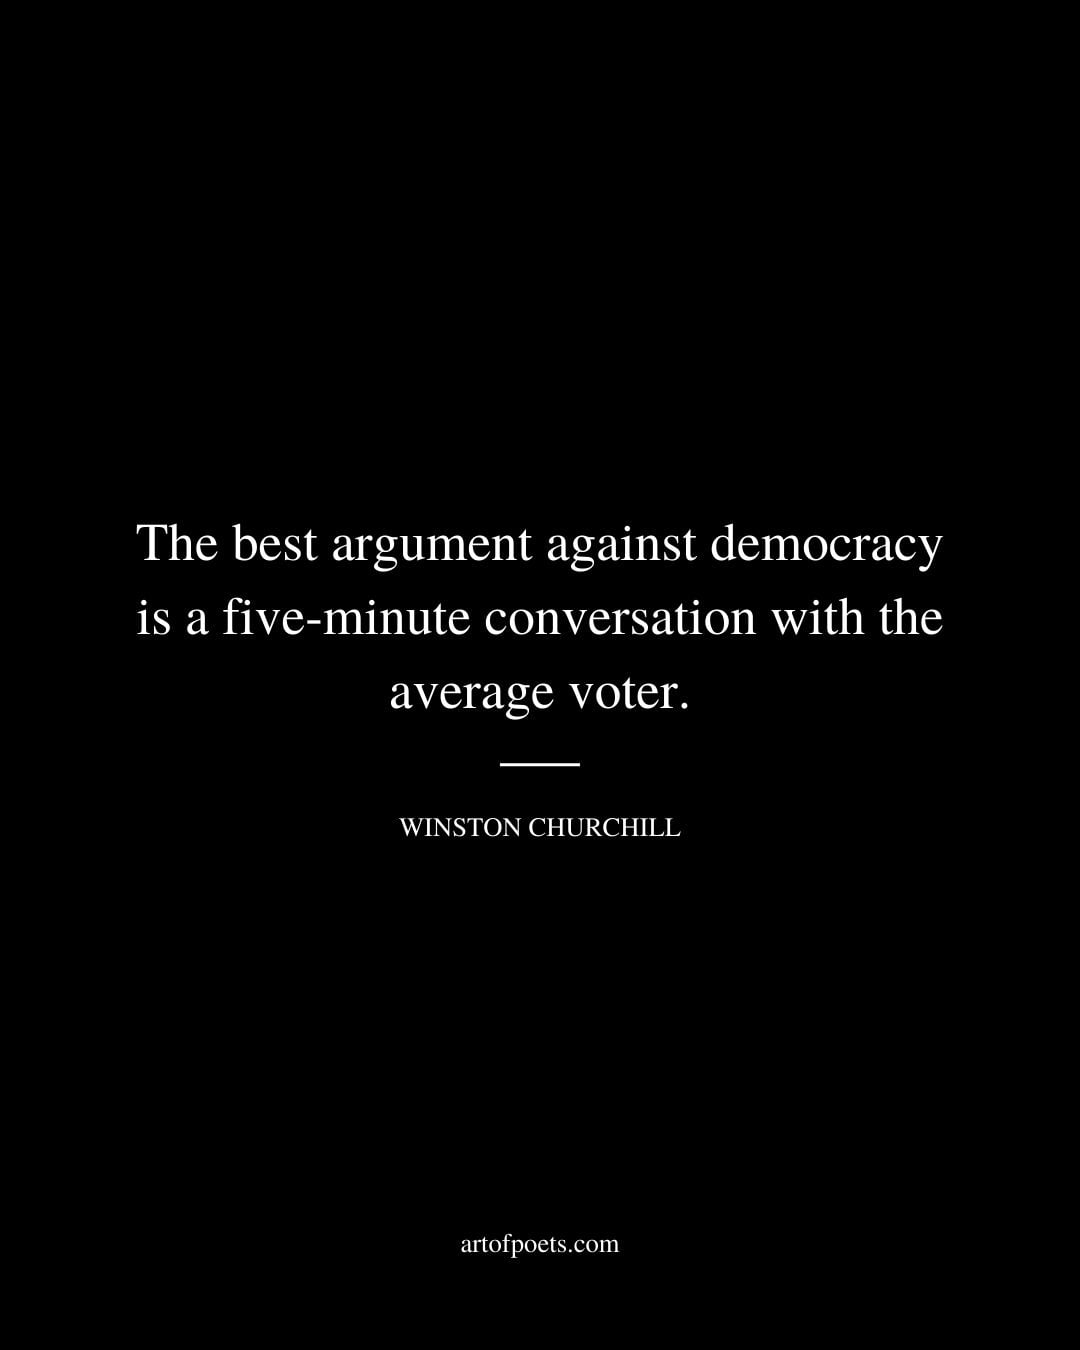 The best argument against democracy is a five minute conversation with the average voter